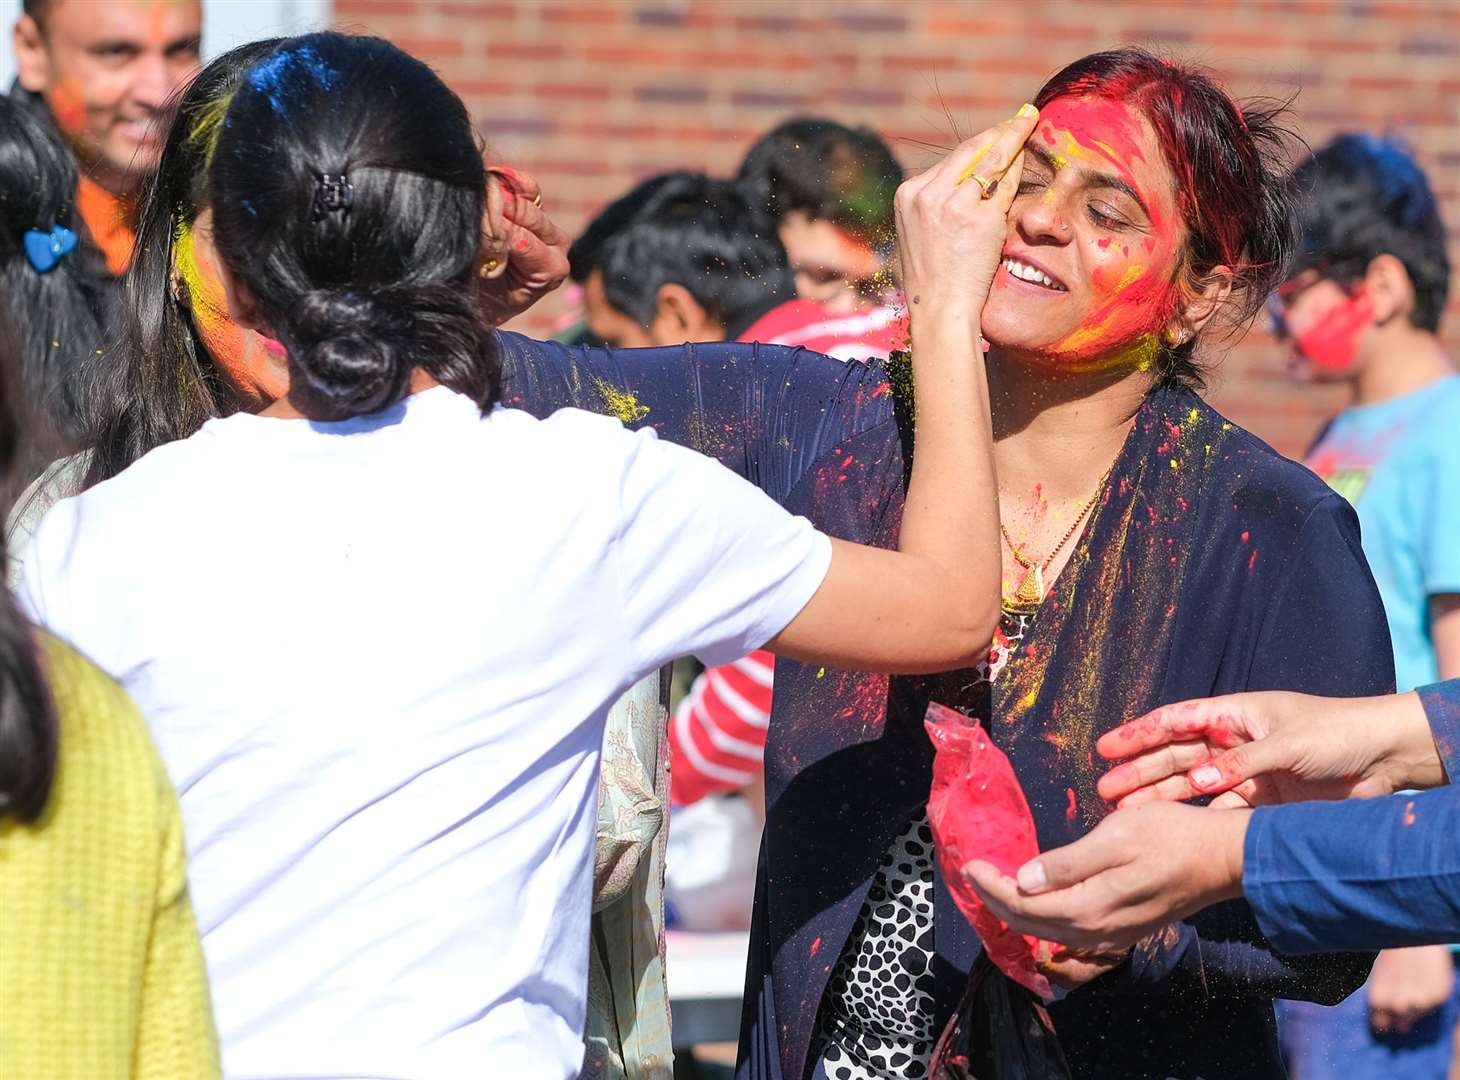 Celebrate Holi Festival, or the Festival of Colour, in Kent this spring